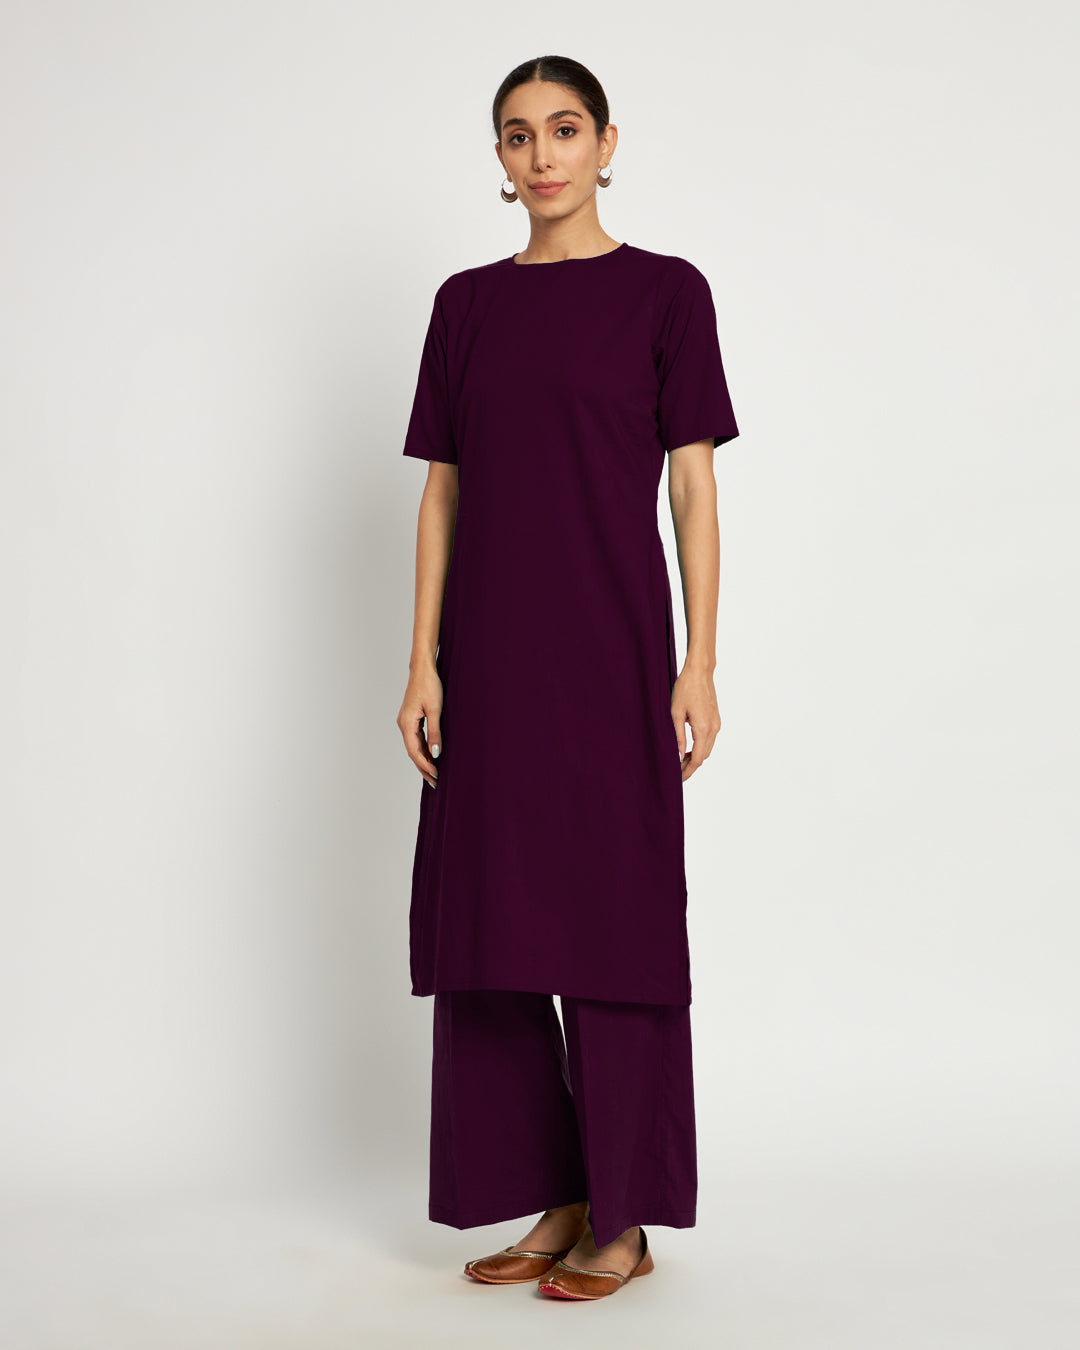 Plum Passion Round Neck Long Solid Co-ord Set